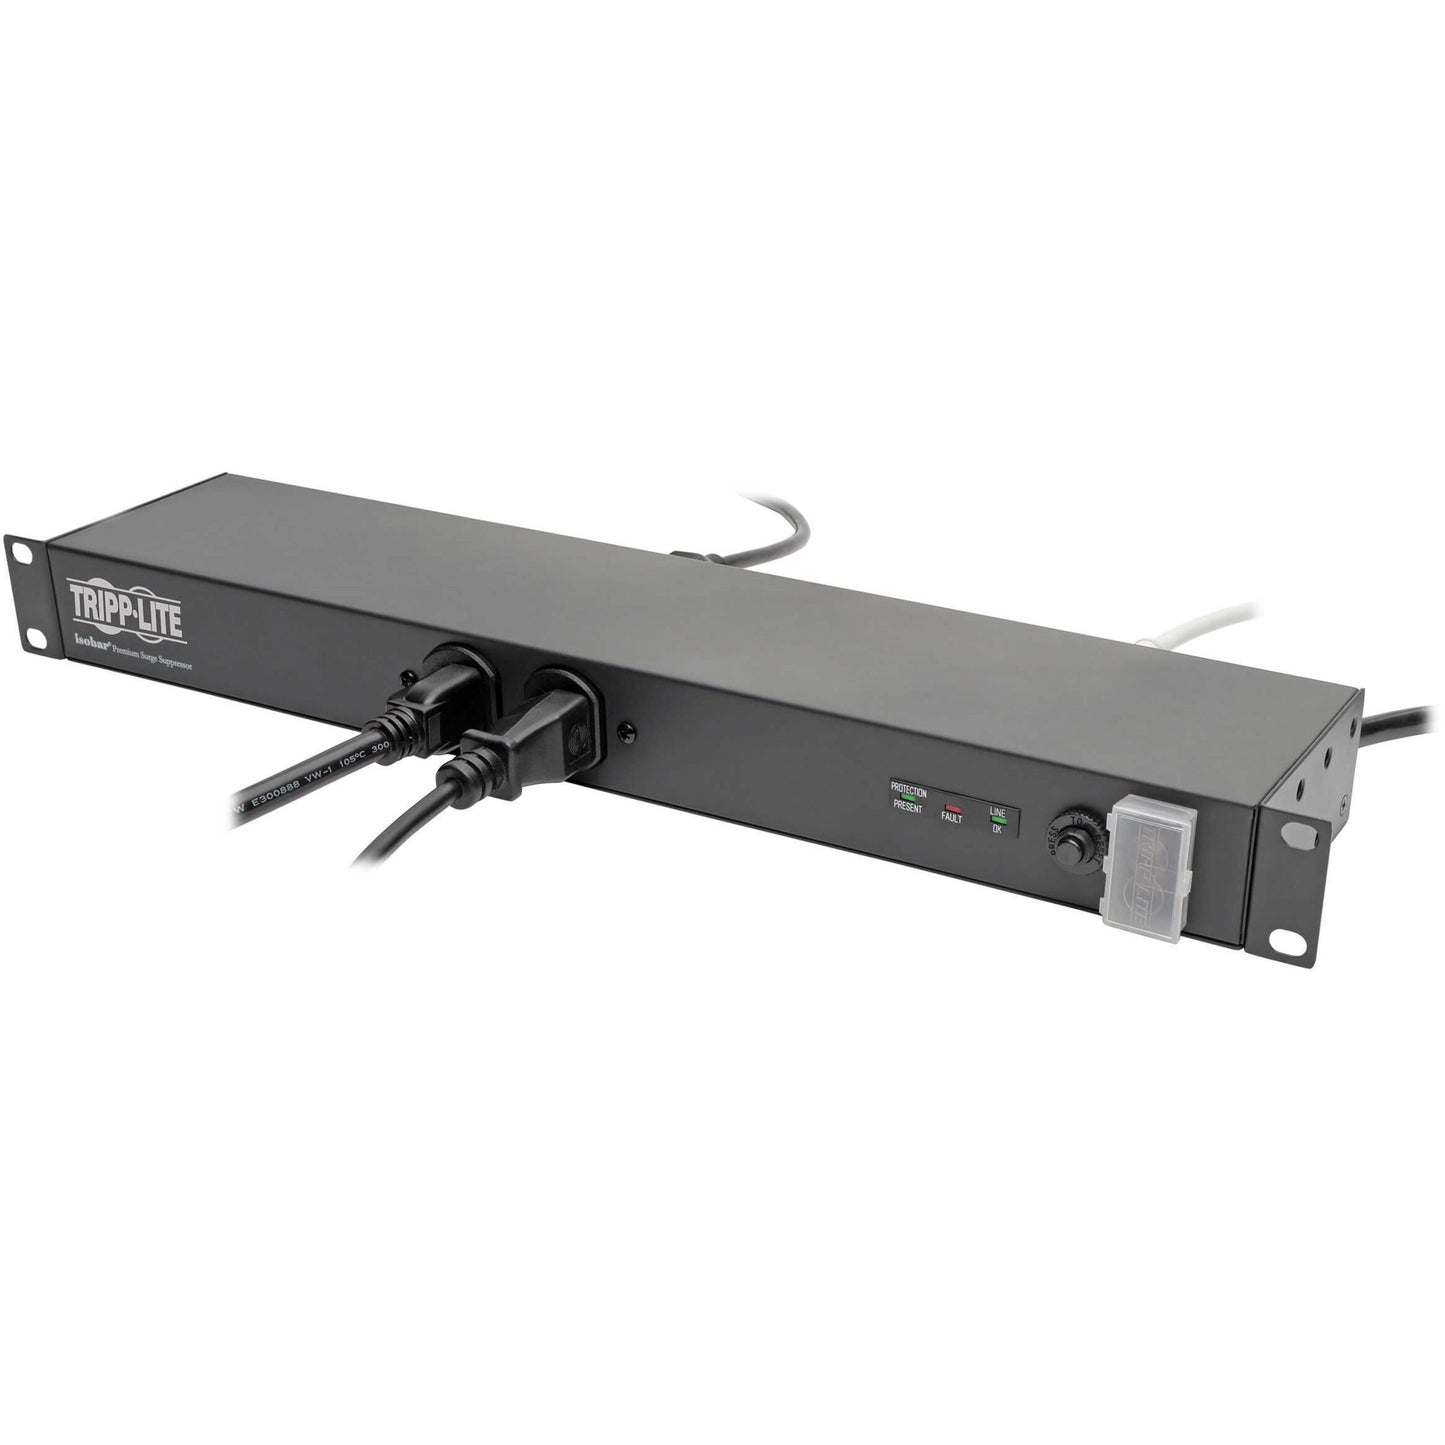 Tripp Lite Isobar Surge Protector Rackmount 12 Outlet 15' Cord Metal 1URM